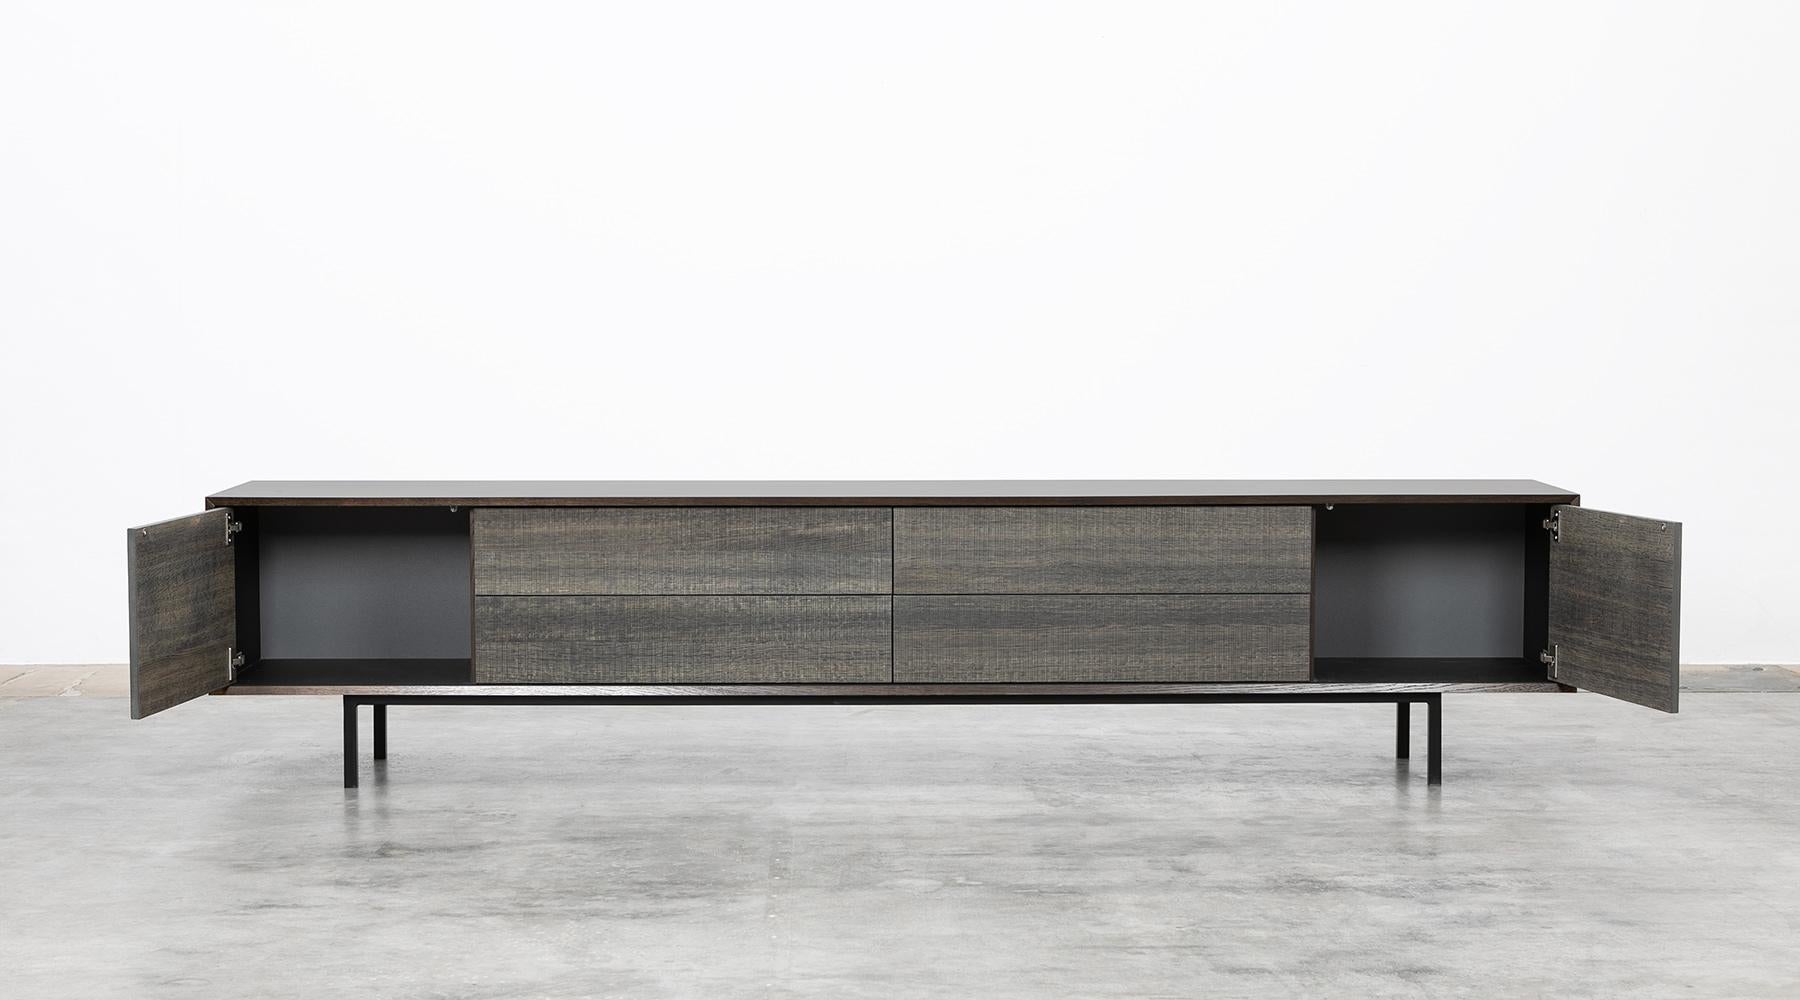 Sideboard by contemporary German artist Johannes Hock. The front of the doors and drawer of this unique piece are made of smoked oak, the corpus is in black HPL on black metal legs. Manufactured by Atelier Johannes Hock.

Hock refined his craft